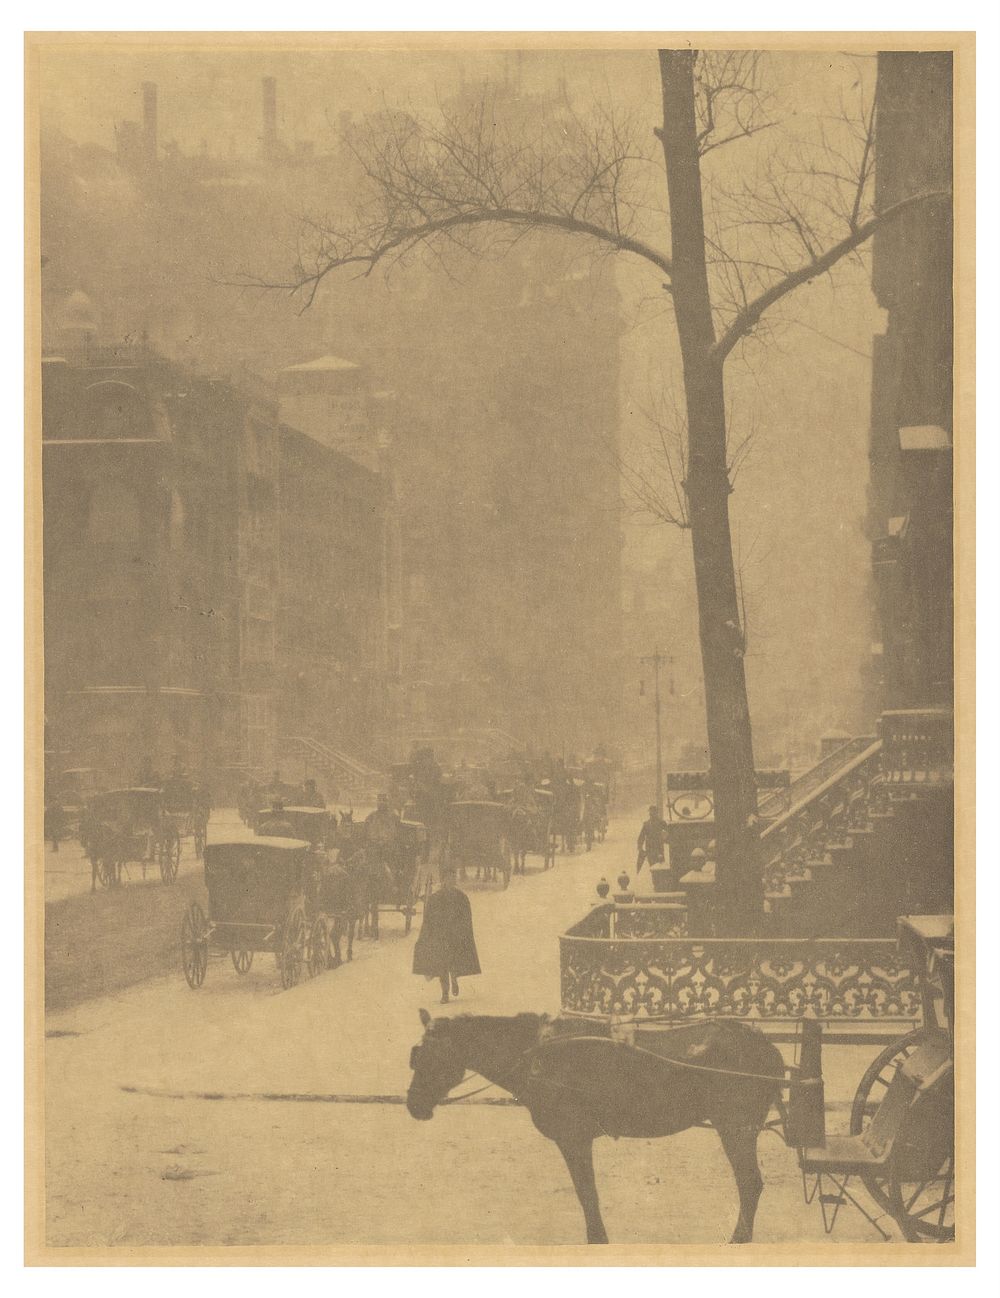 The Street - Design for a Poster by Alfred Stieglitz